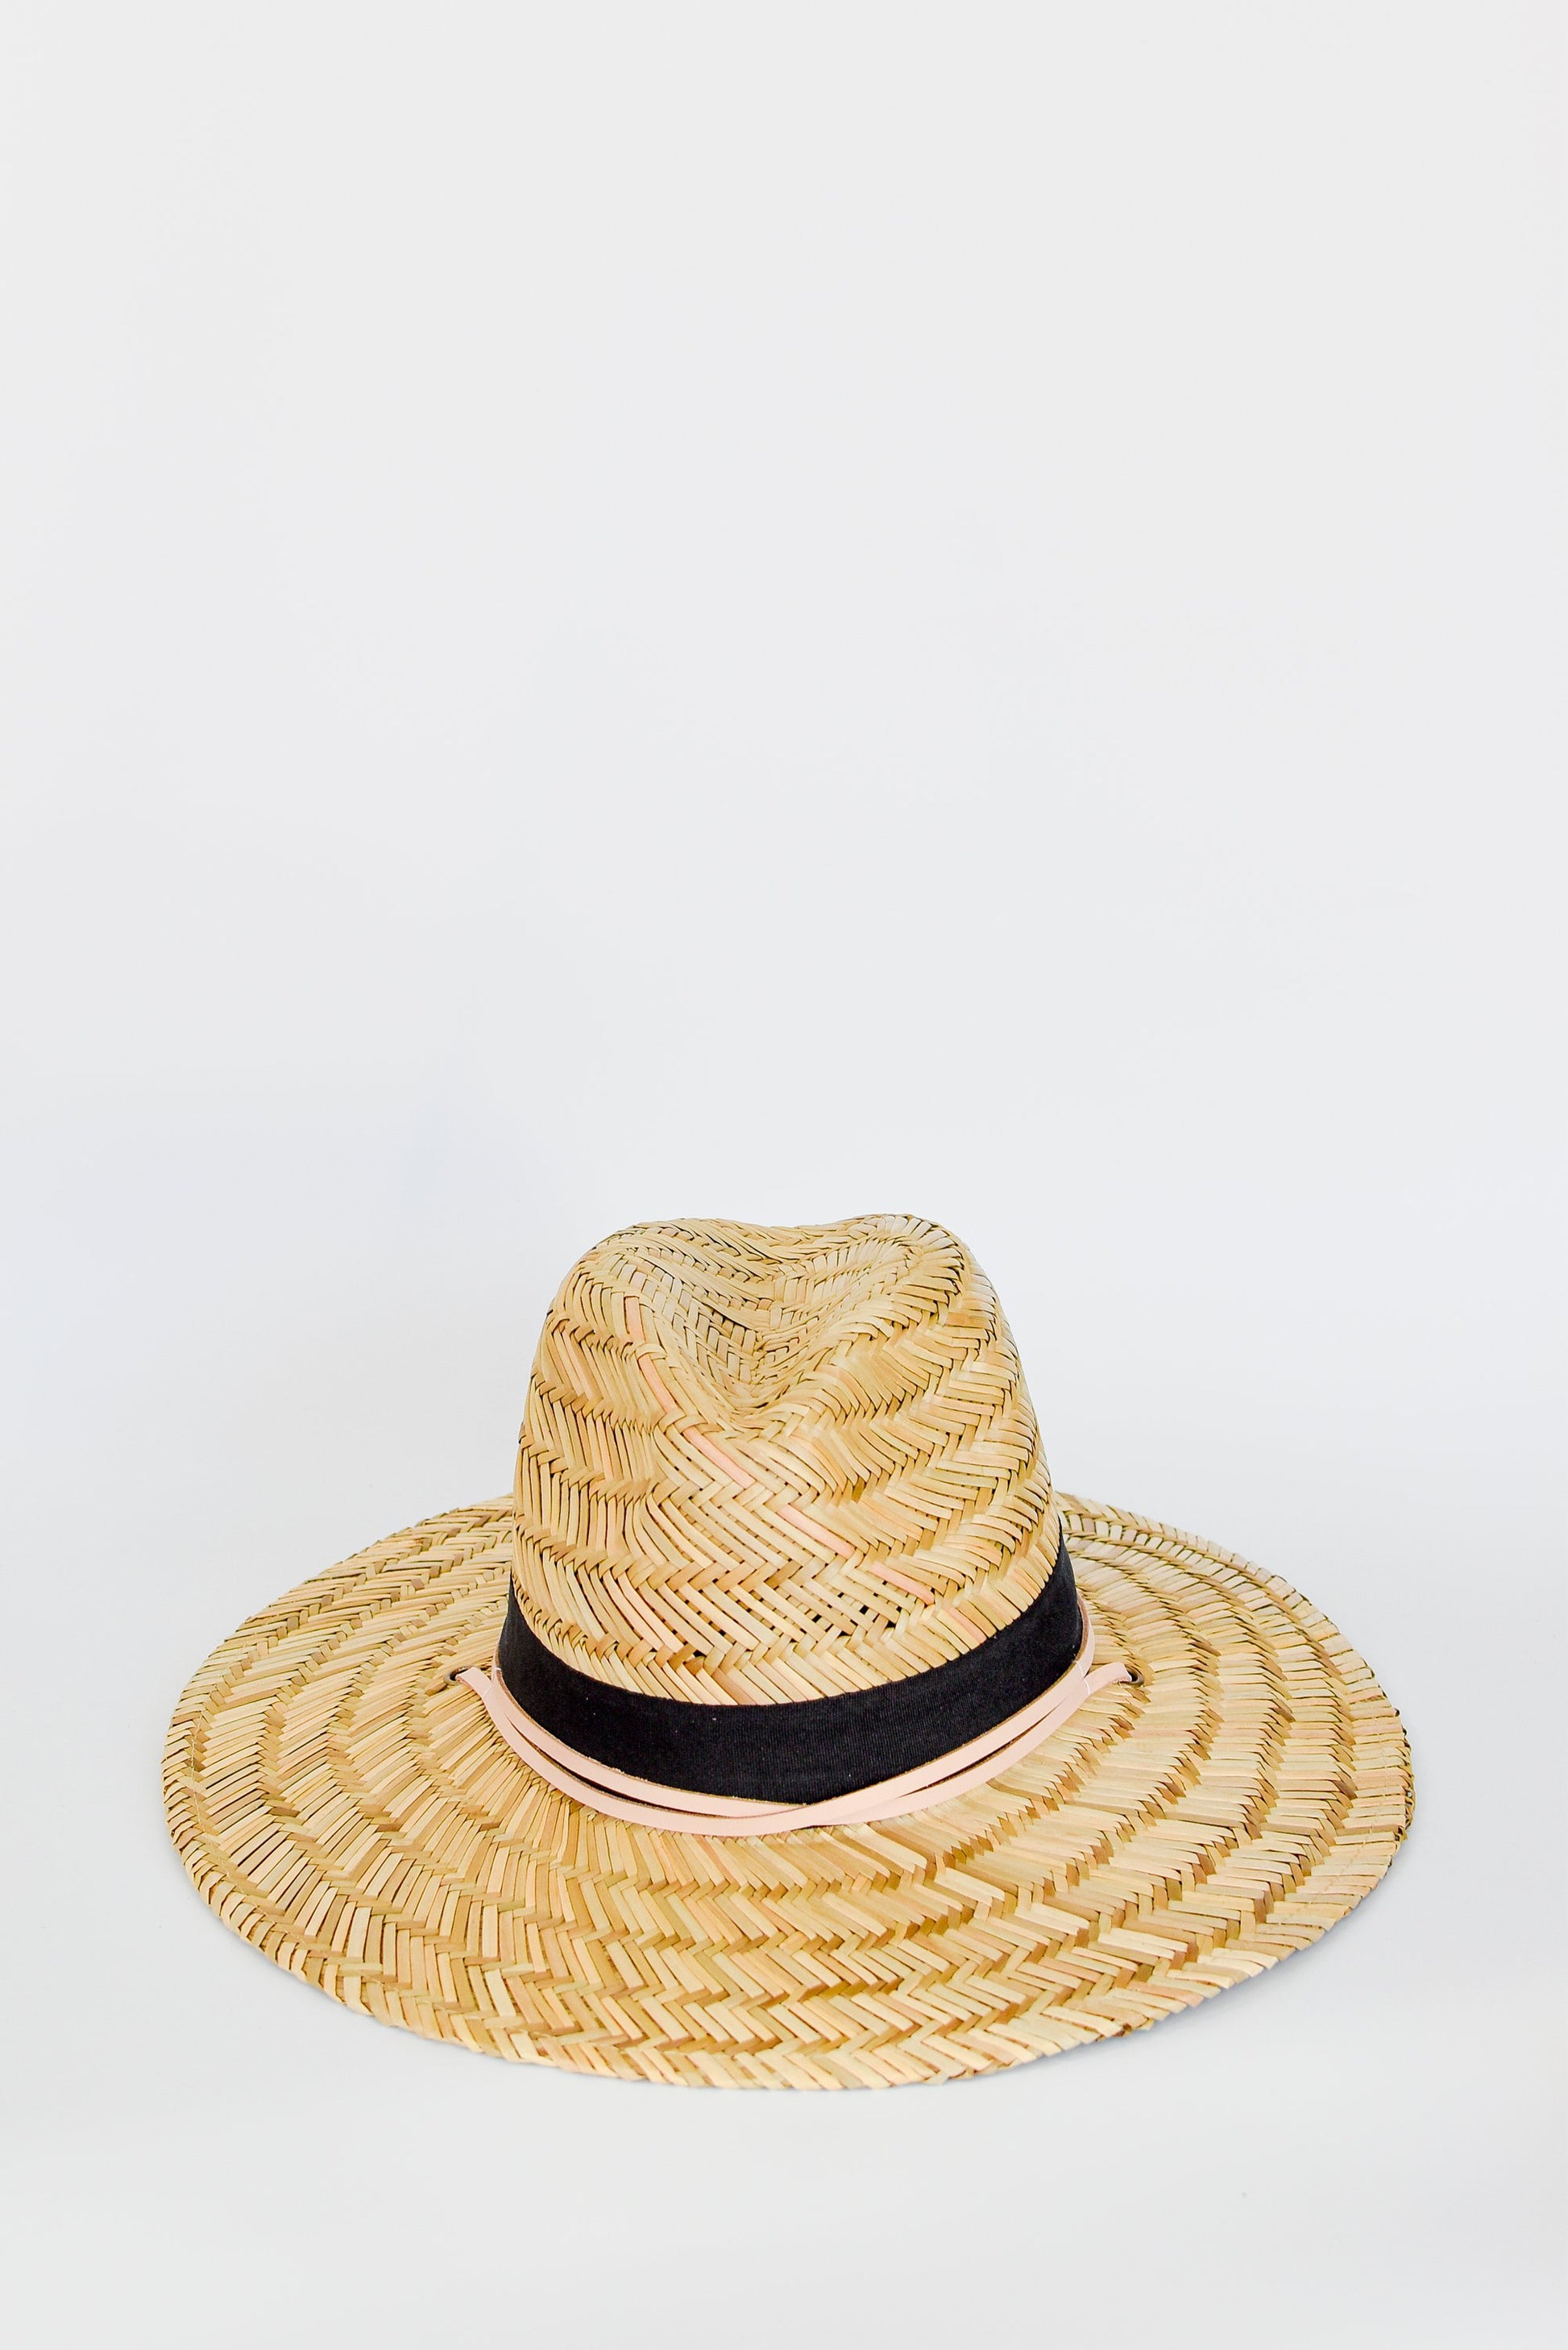 Straw lifeguard hat with tan leather chin strap and black band detail.